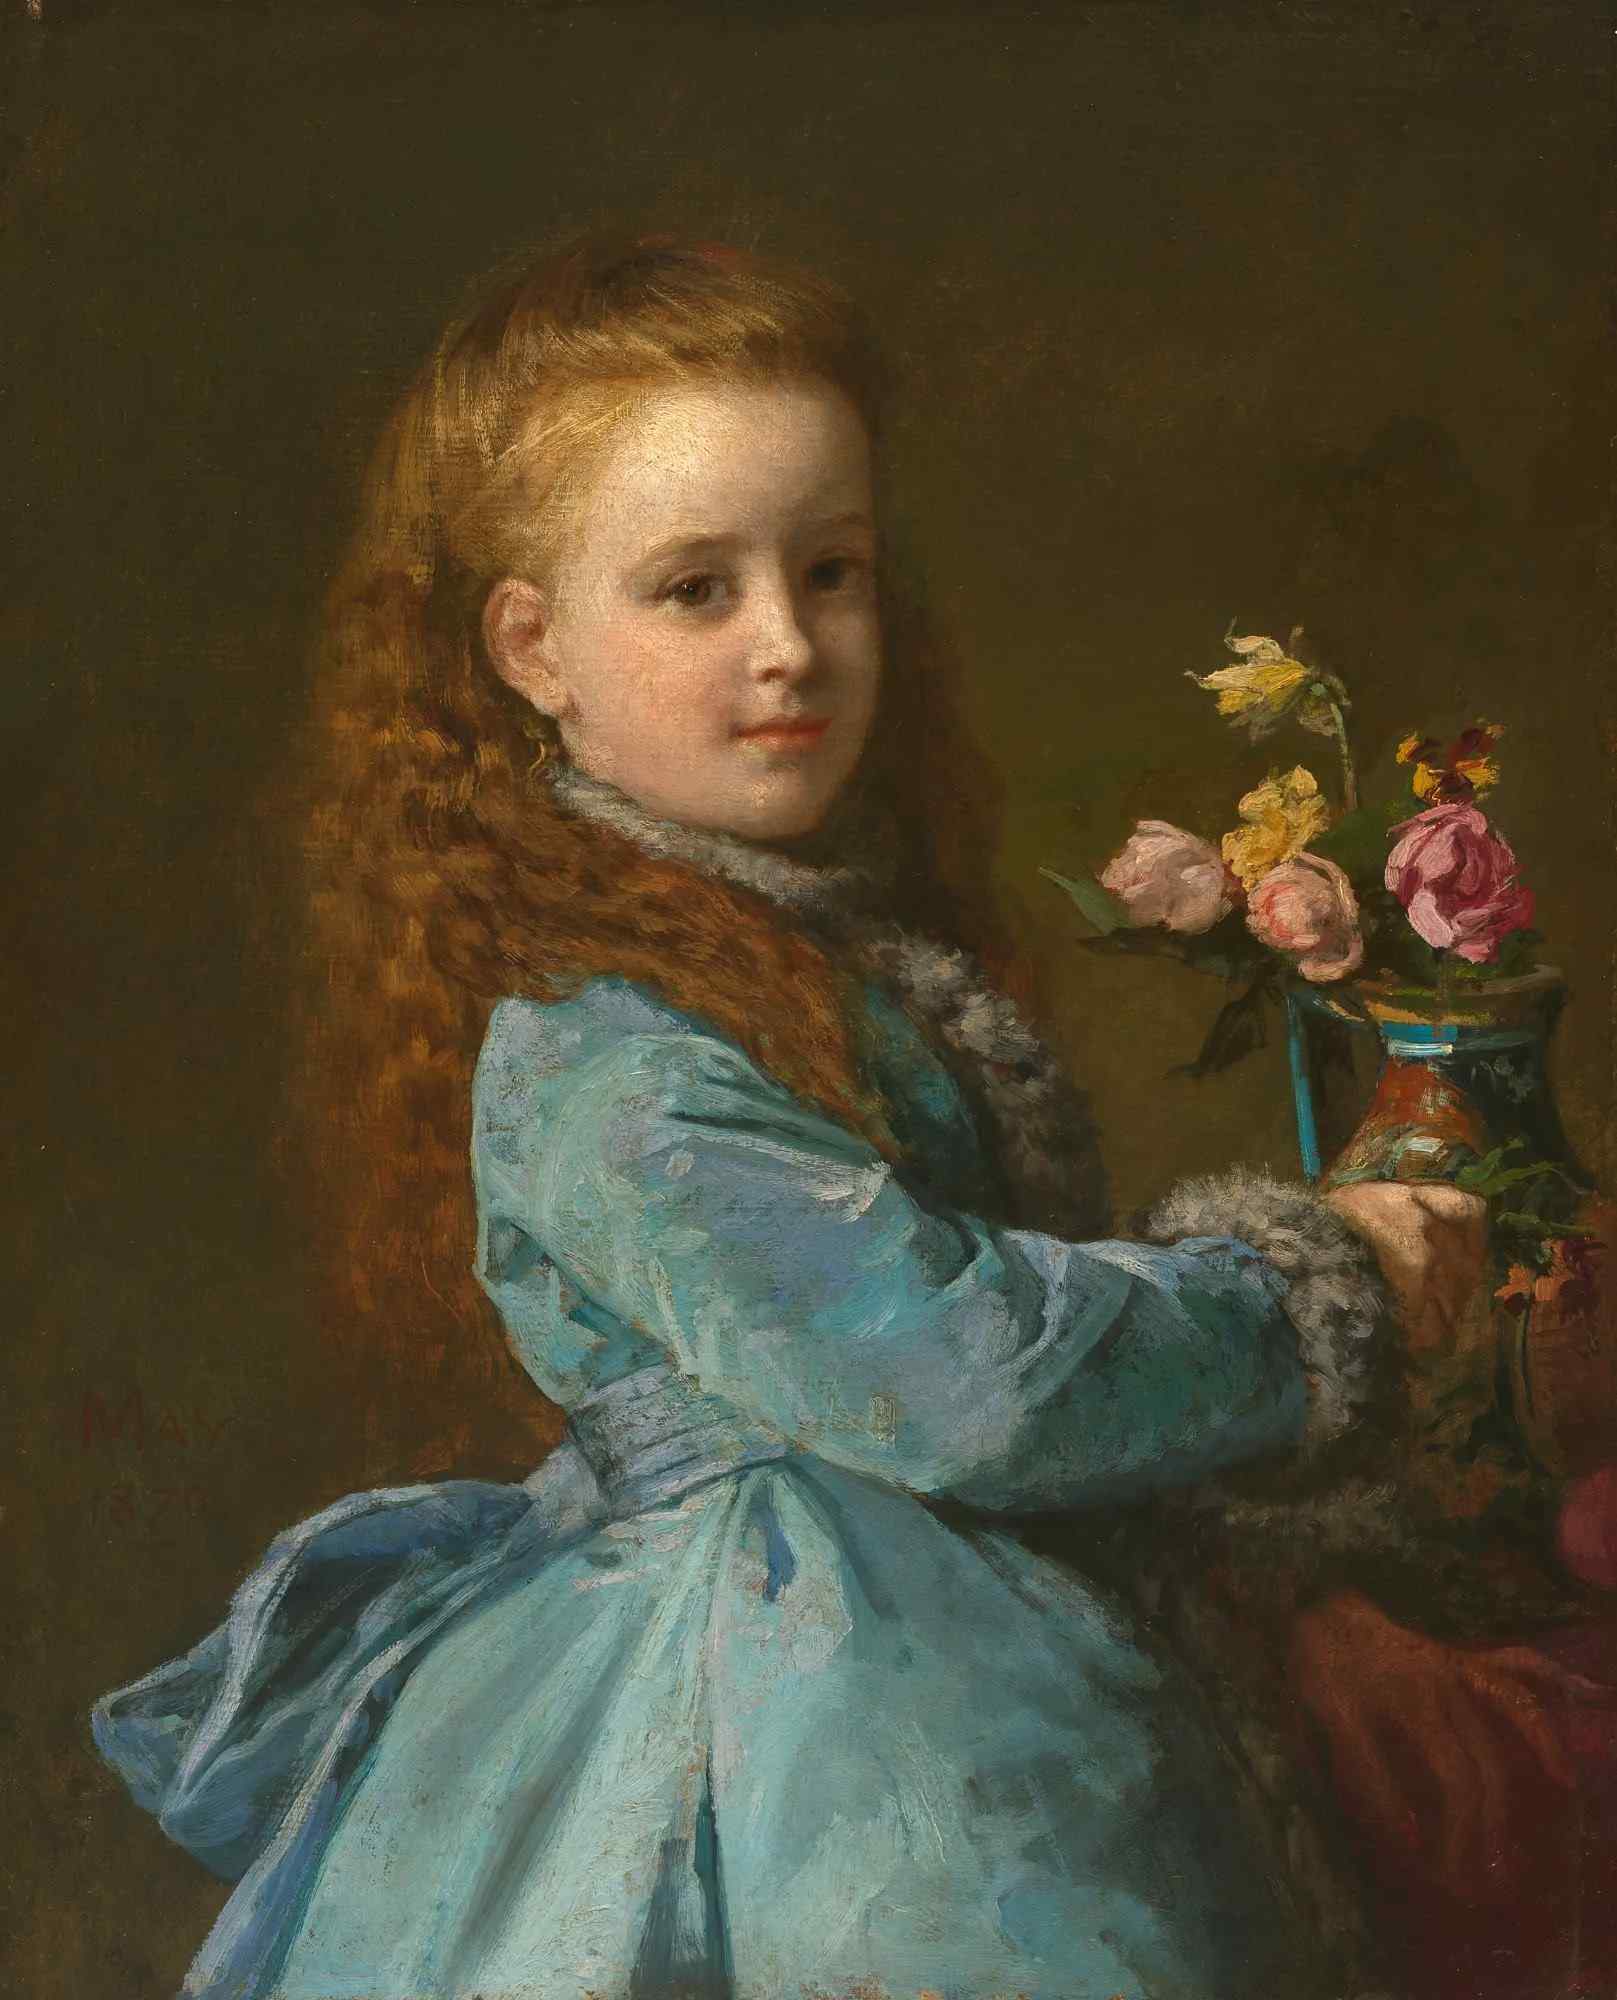 Edith Jones (Wharton) at Age 5 by Edward Harrison. Image courtesy of National Portrait Gallery, Smithsonian Institution